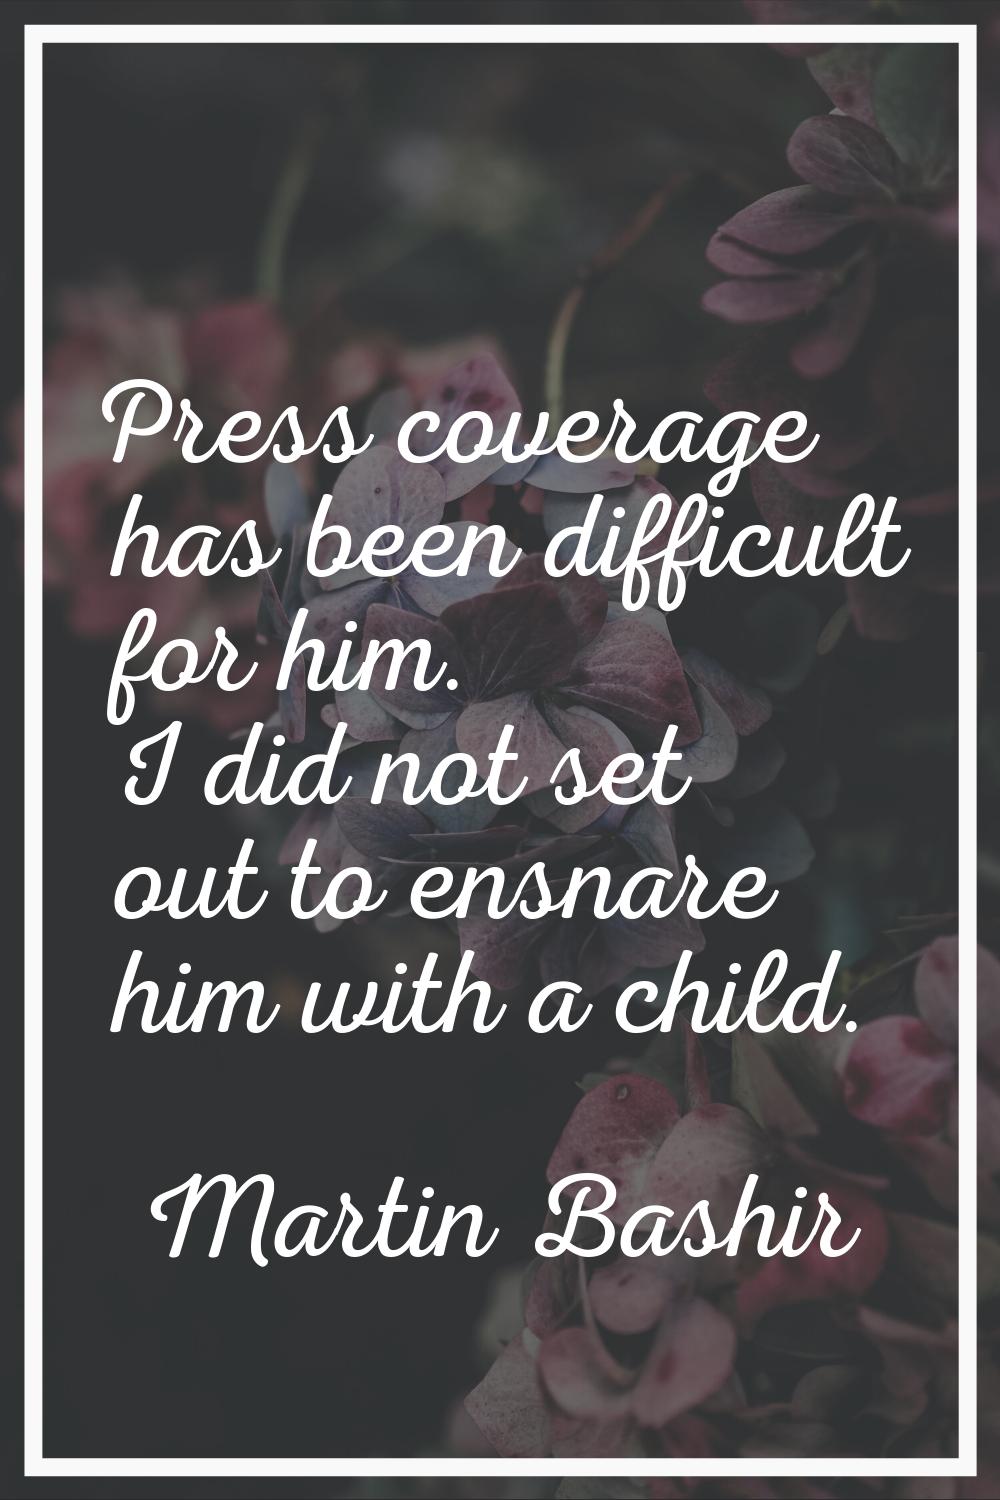 Press coverage has been difficult for him. I did not set out to ensnare him with a child.